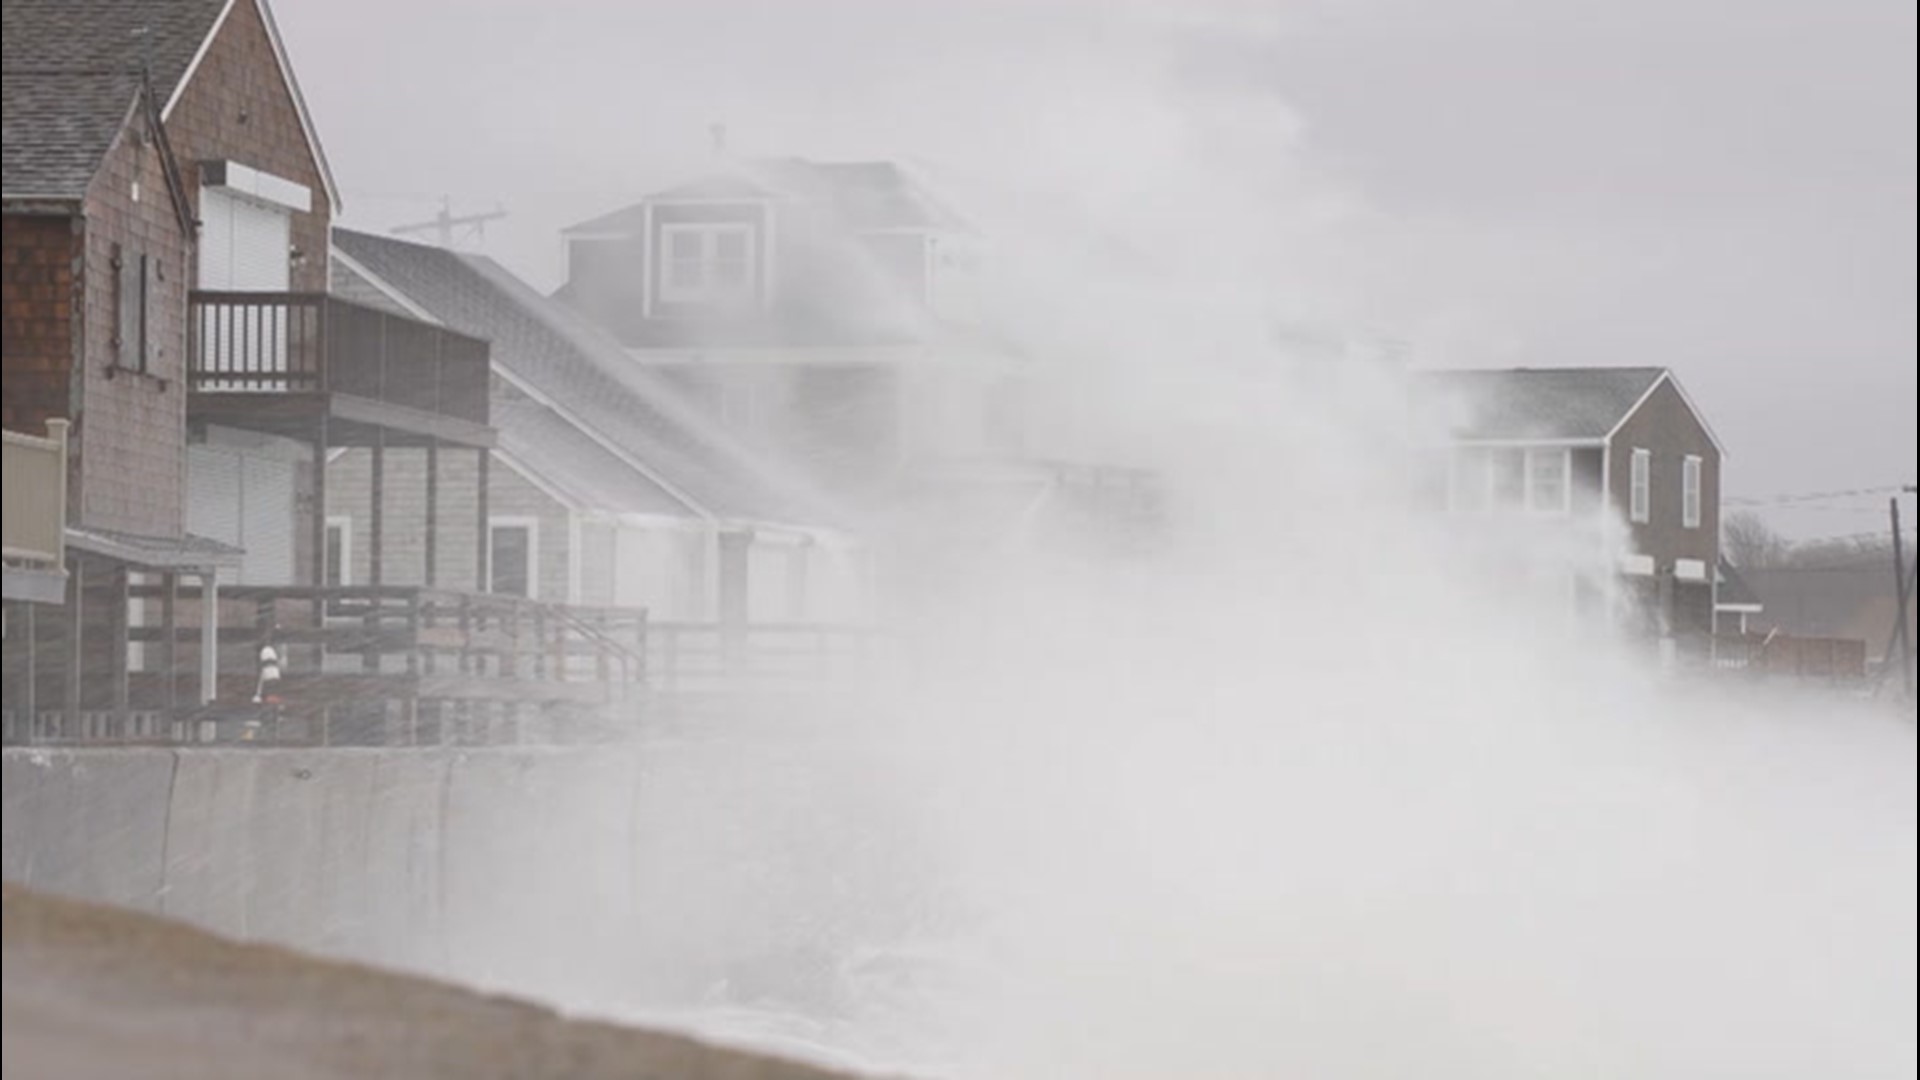 While snow has gotten most of the attention from this week's nor'easter, strong winds and coastal flooding have wreaked havoc in coastal areas from New Jersey all the way to Maine.